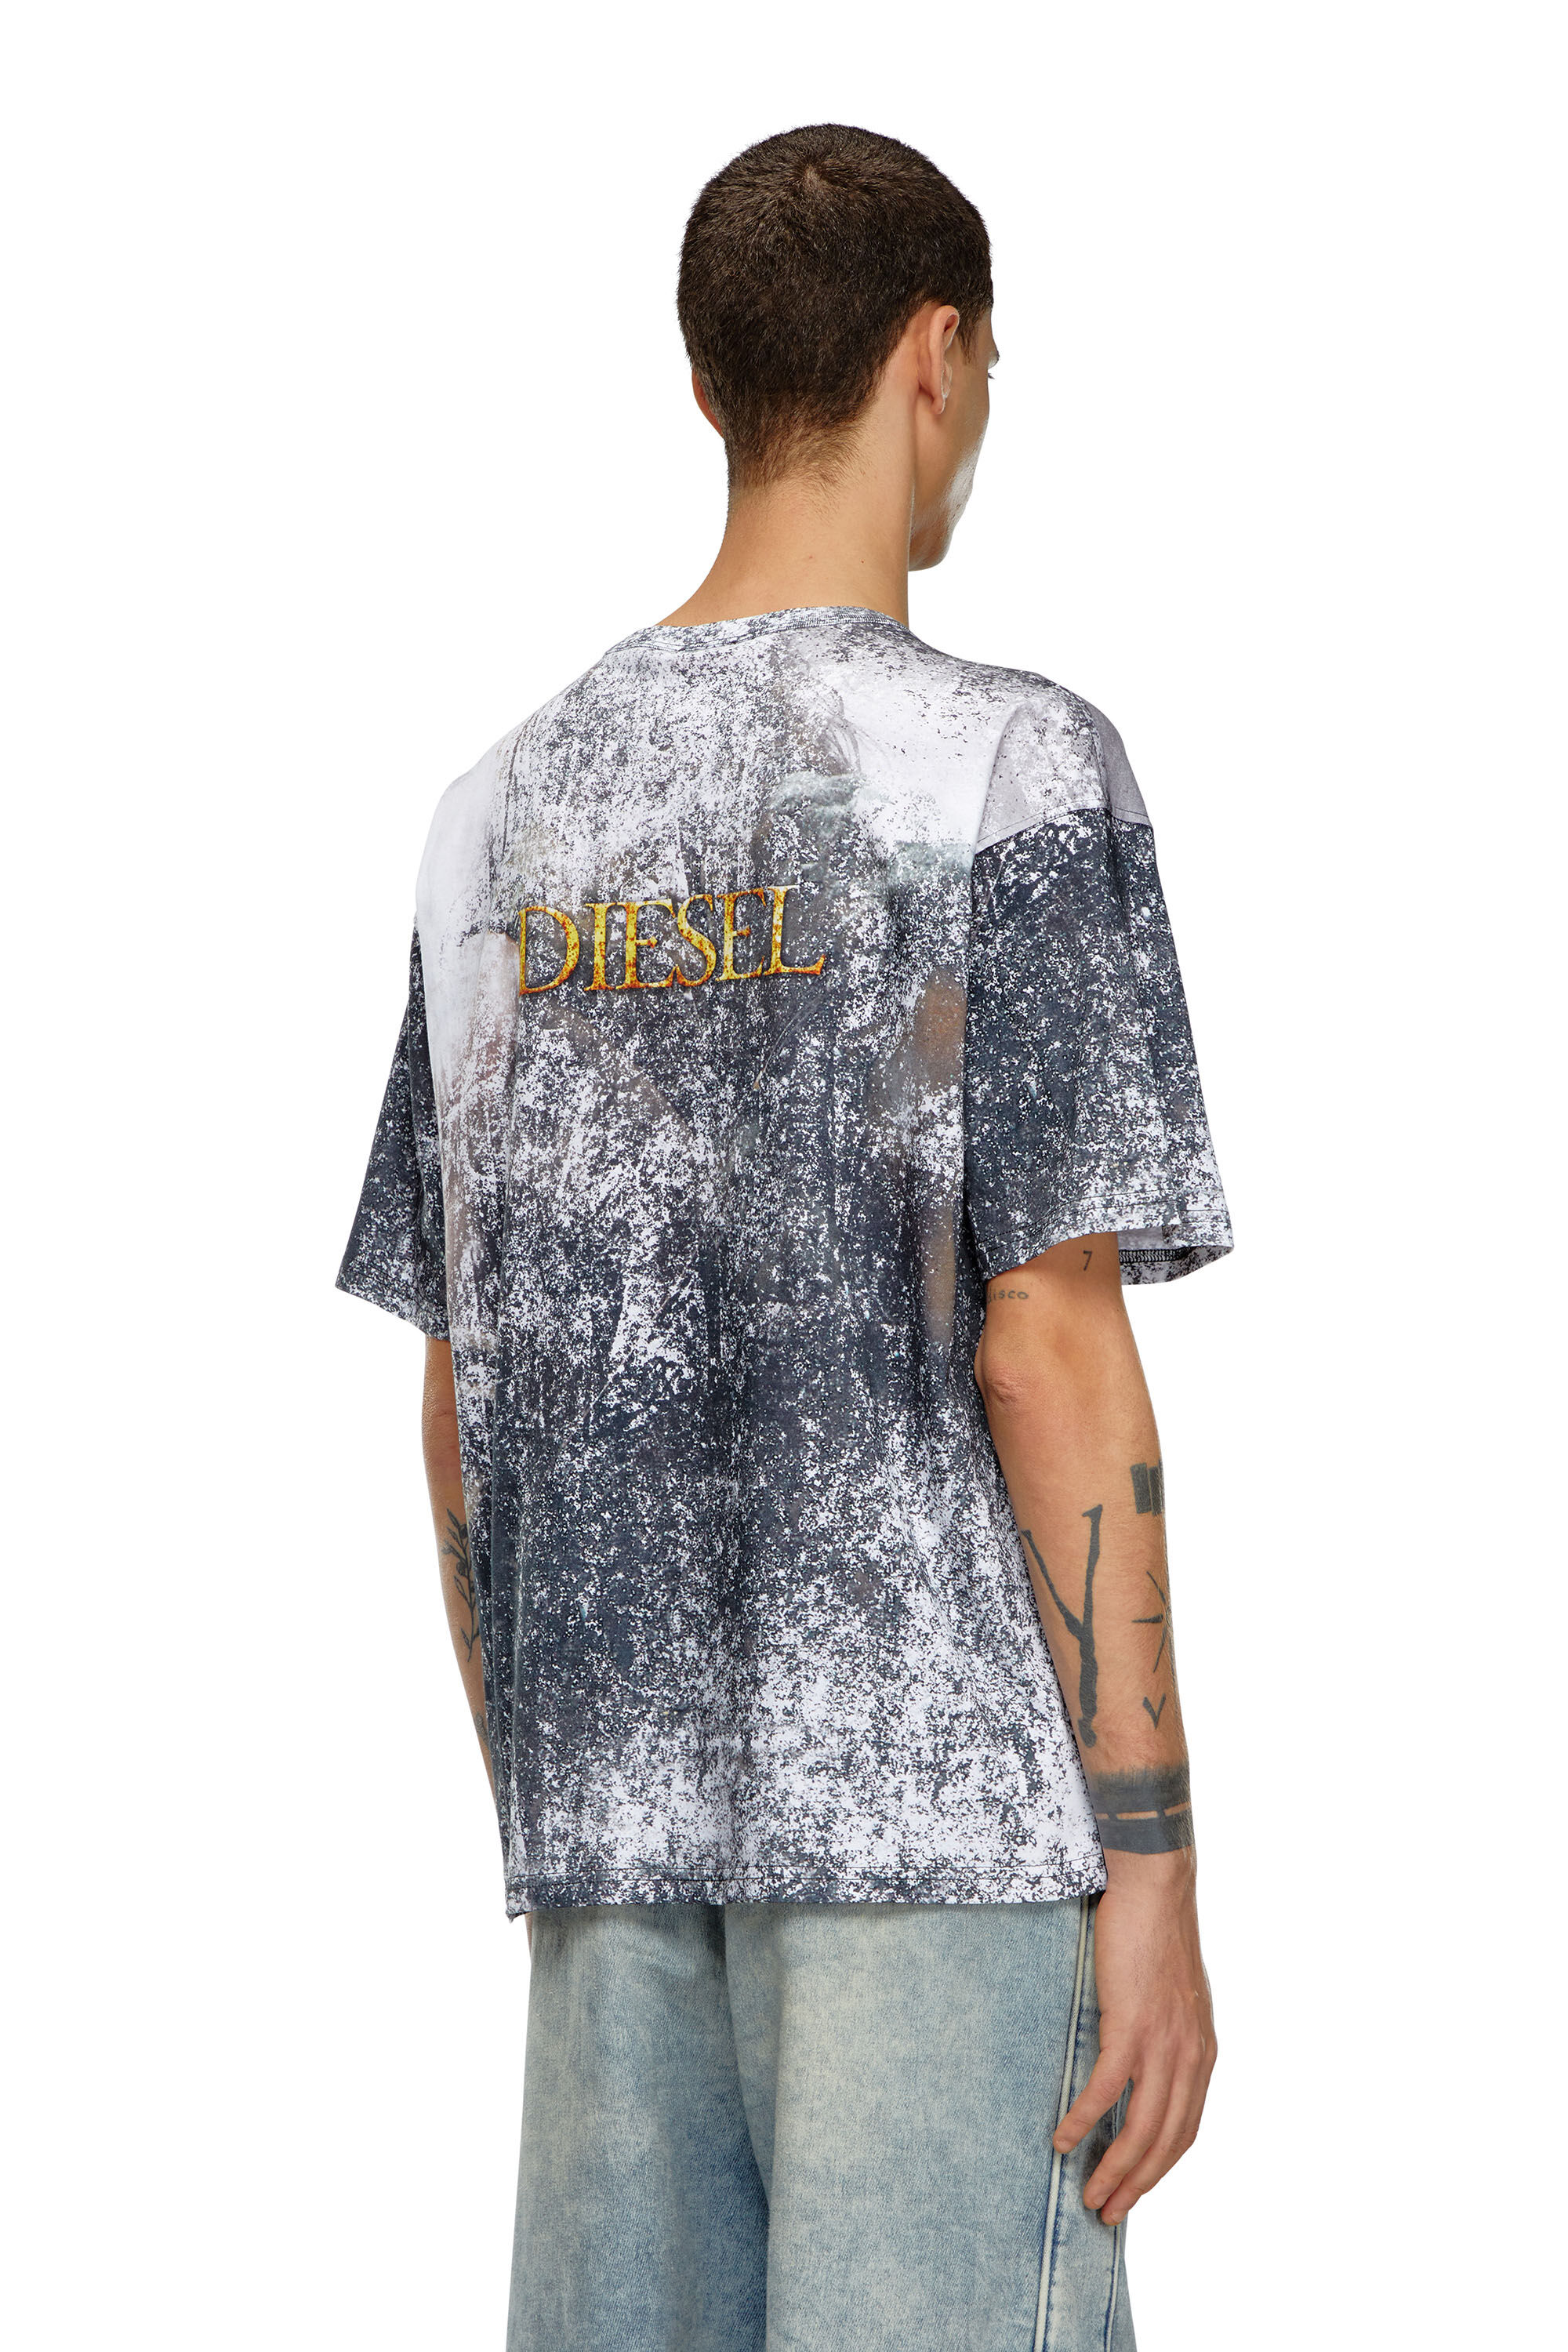 Diesel - T-BOXT-Q21, Male T-shirt with movie poster print in ブラック - Image 4